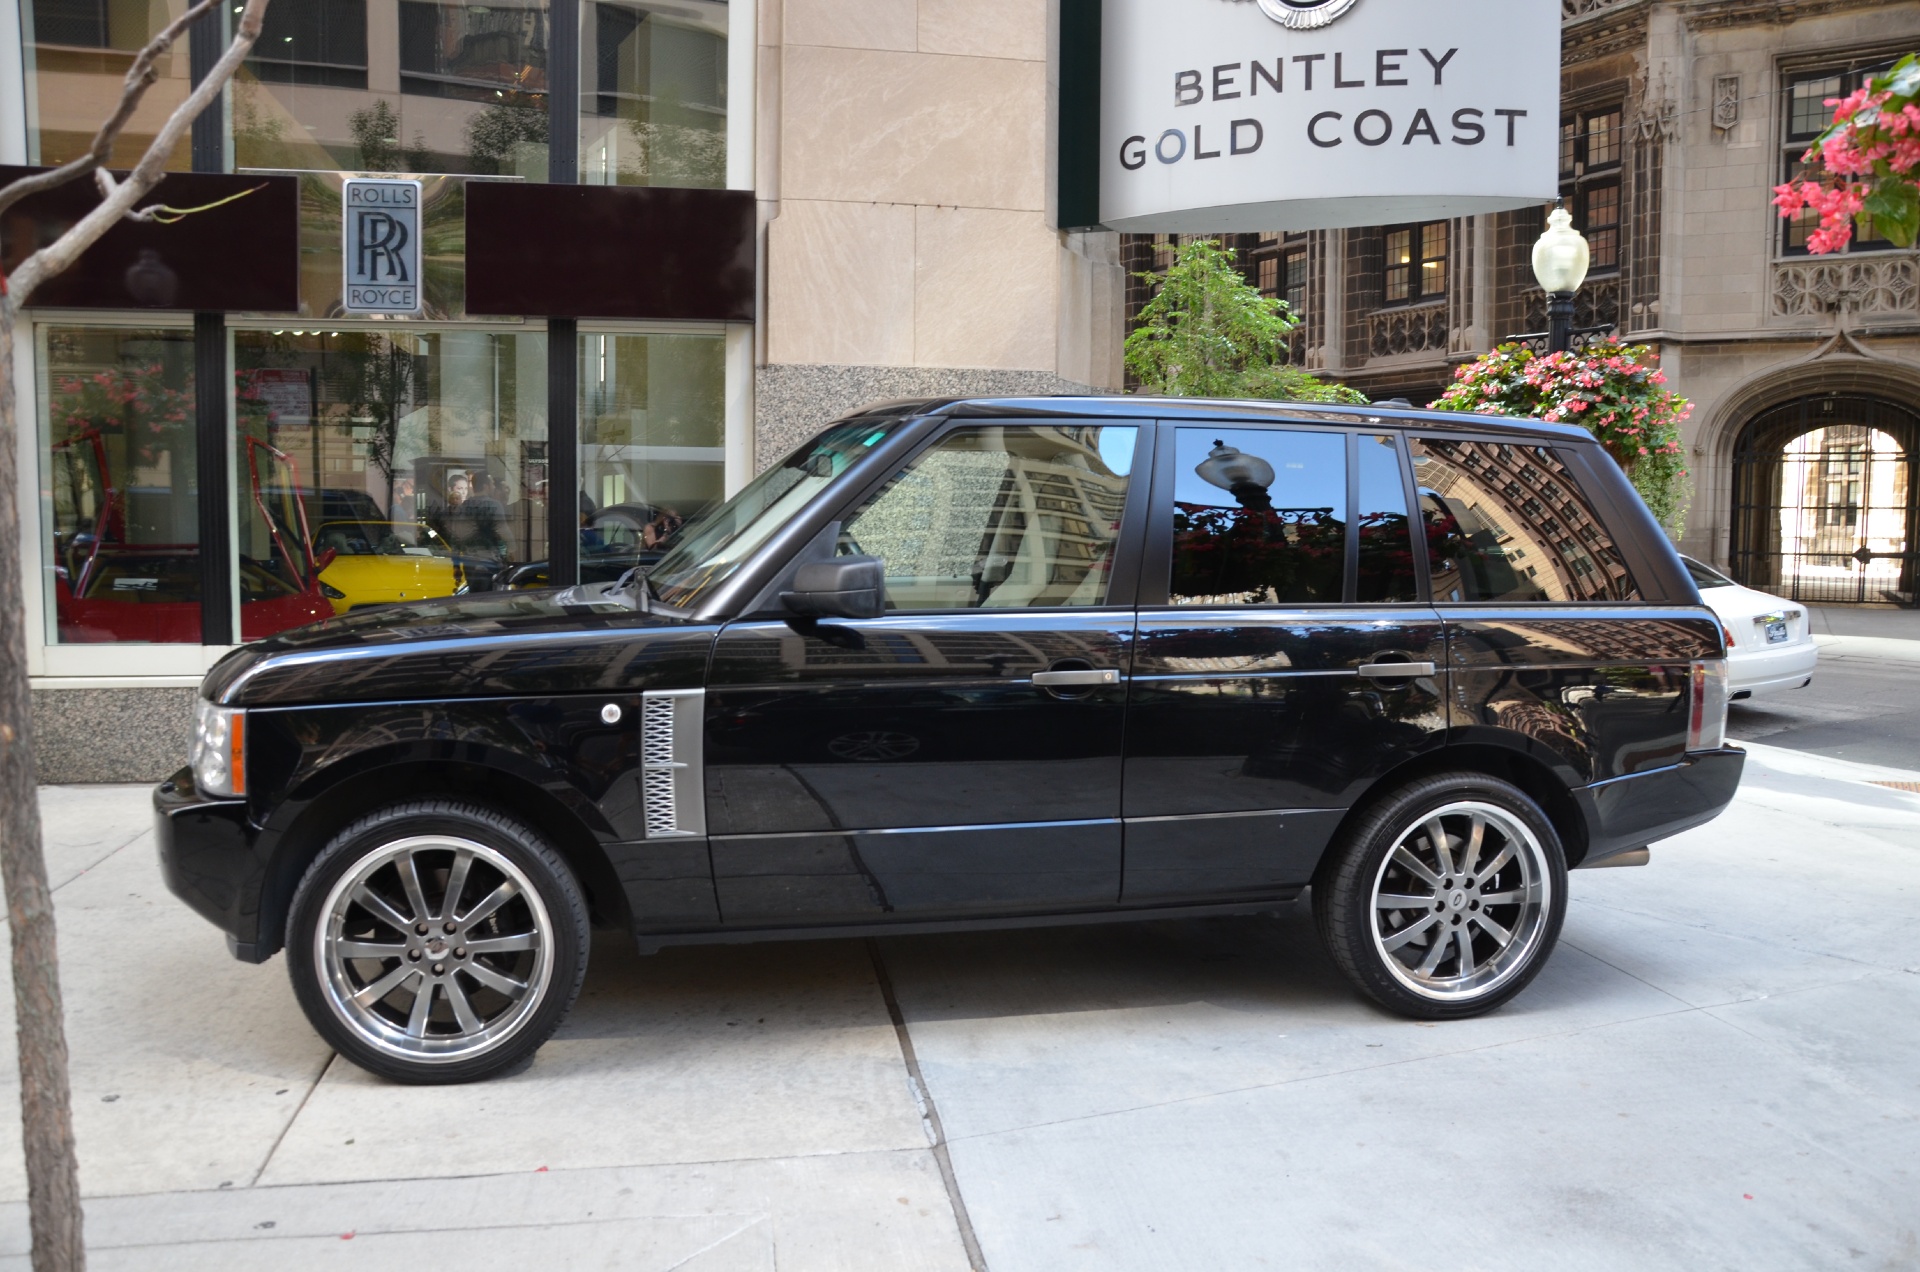 used range rover for sale in illinois